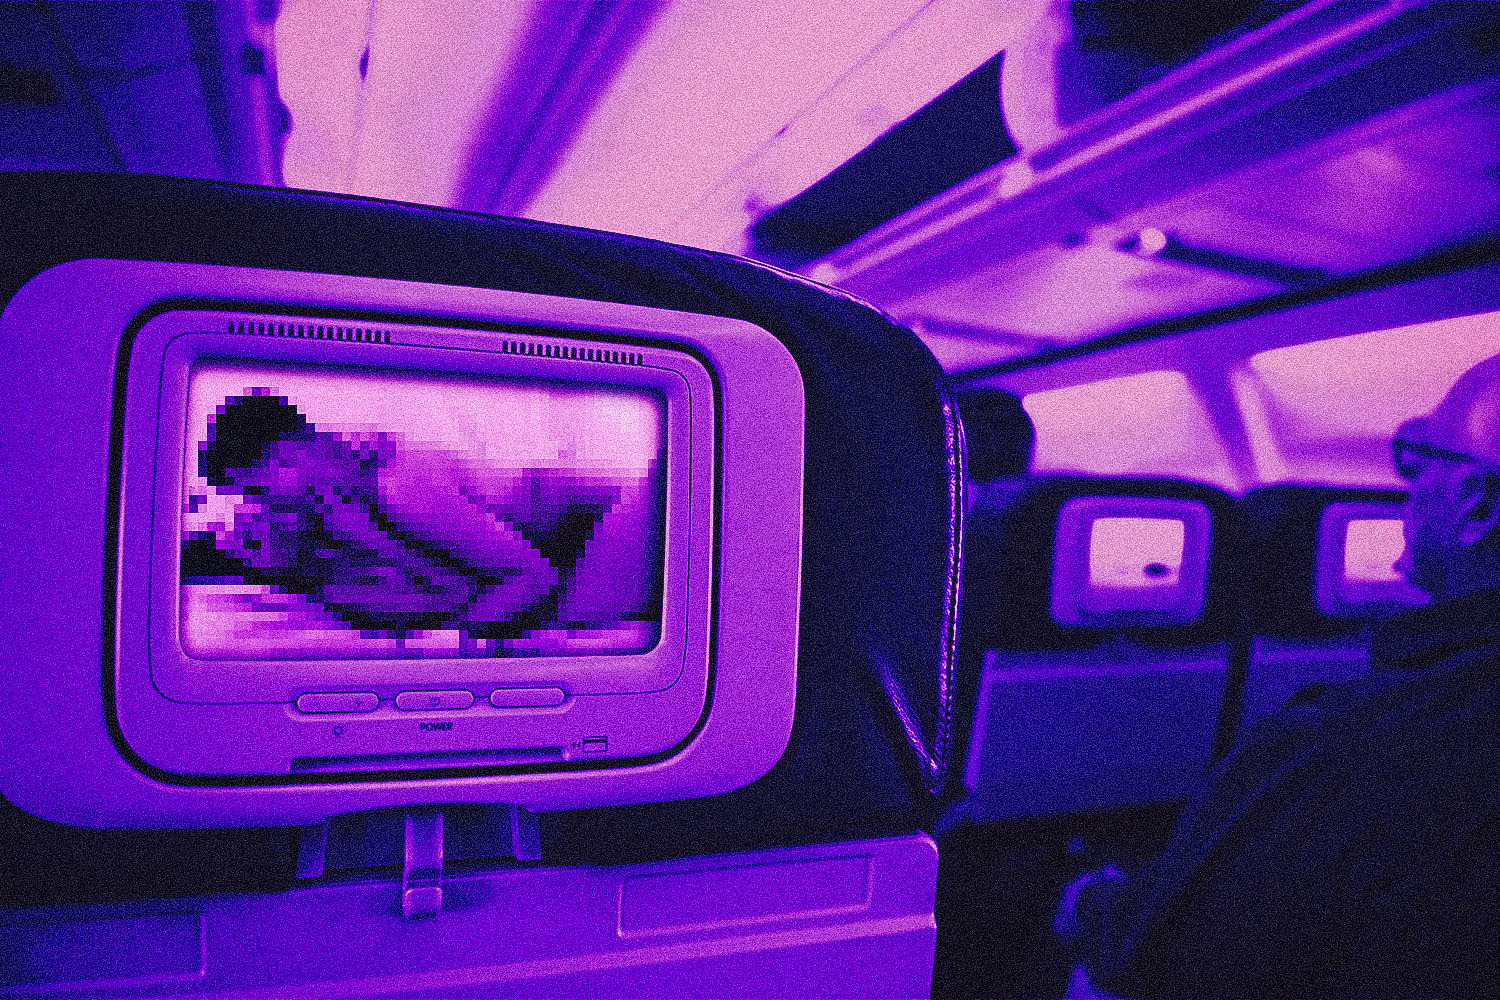 Intimate scene between a man and woman plays on an airplane headrest screen